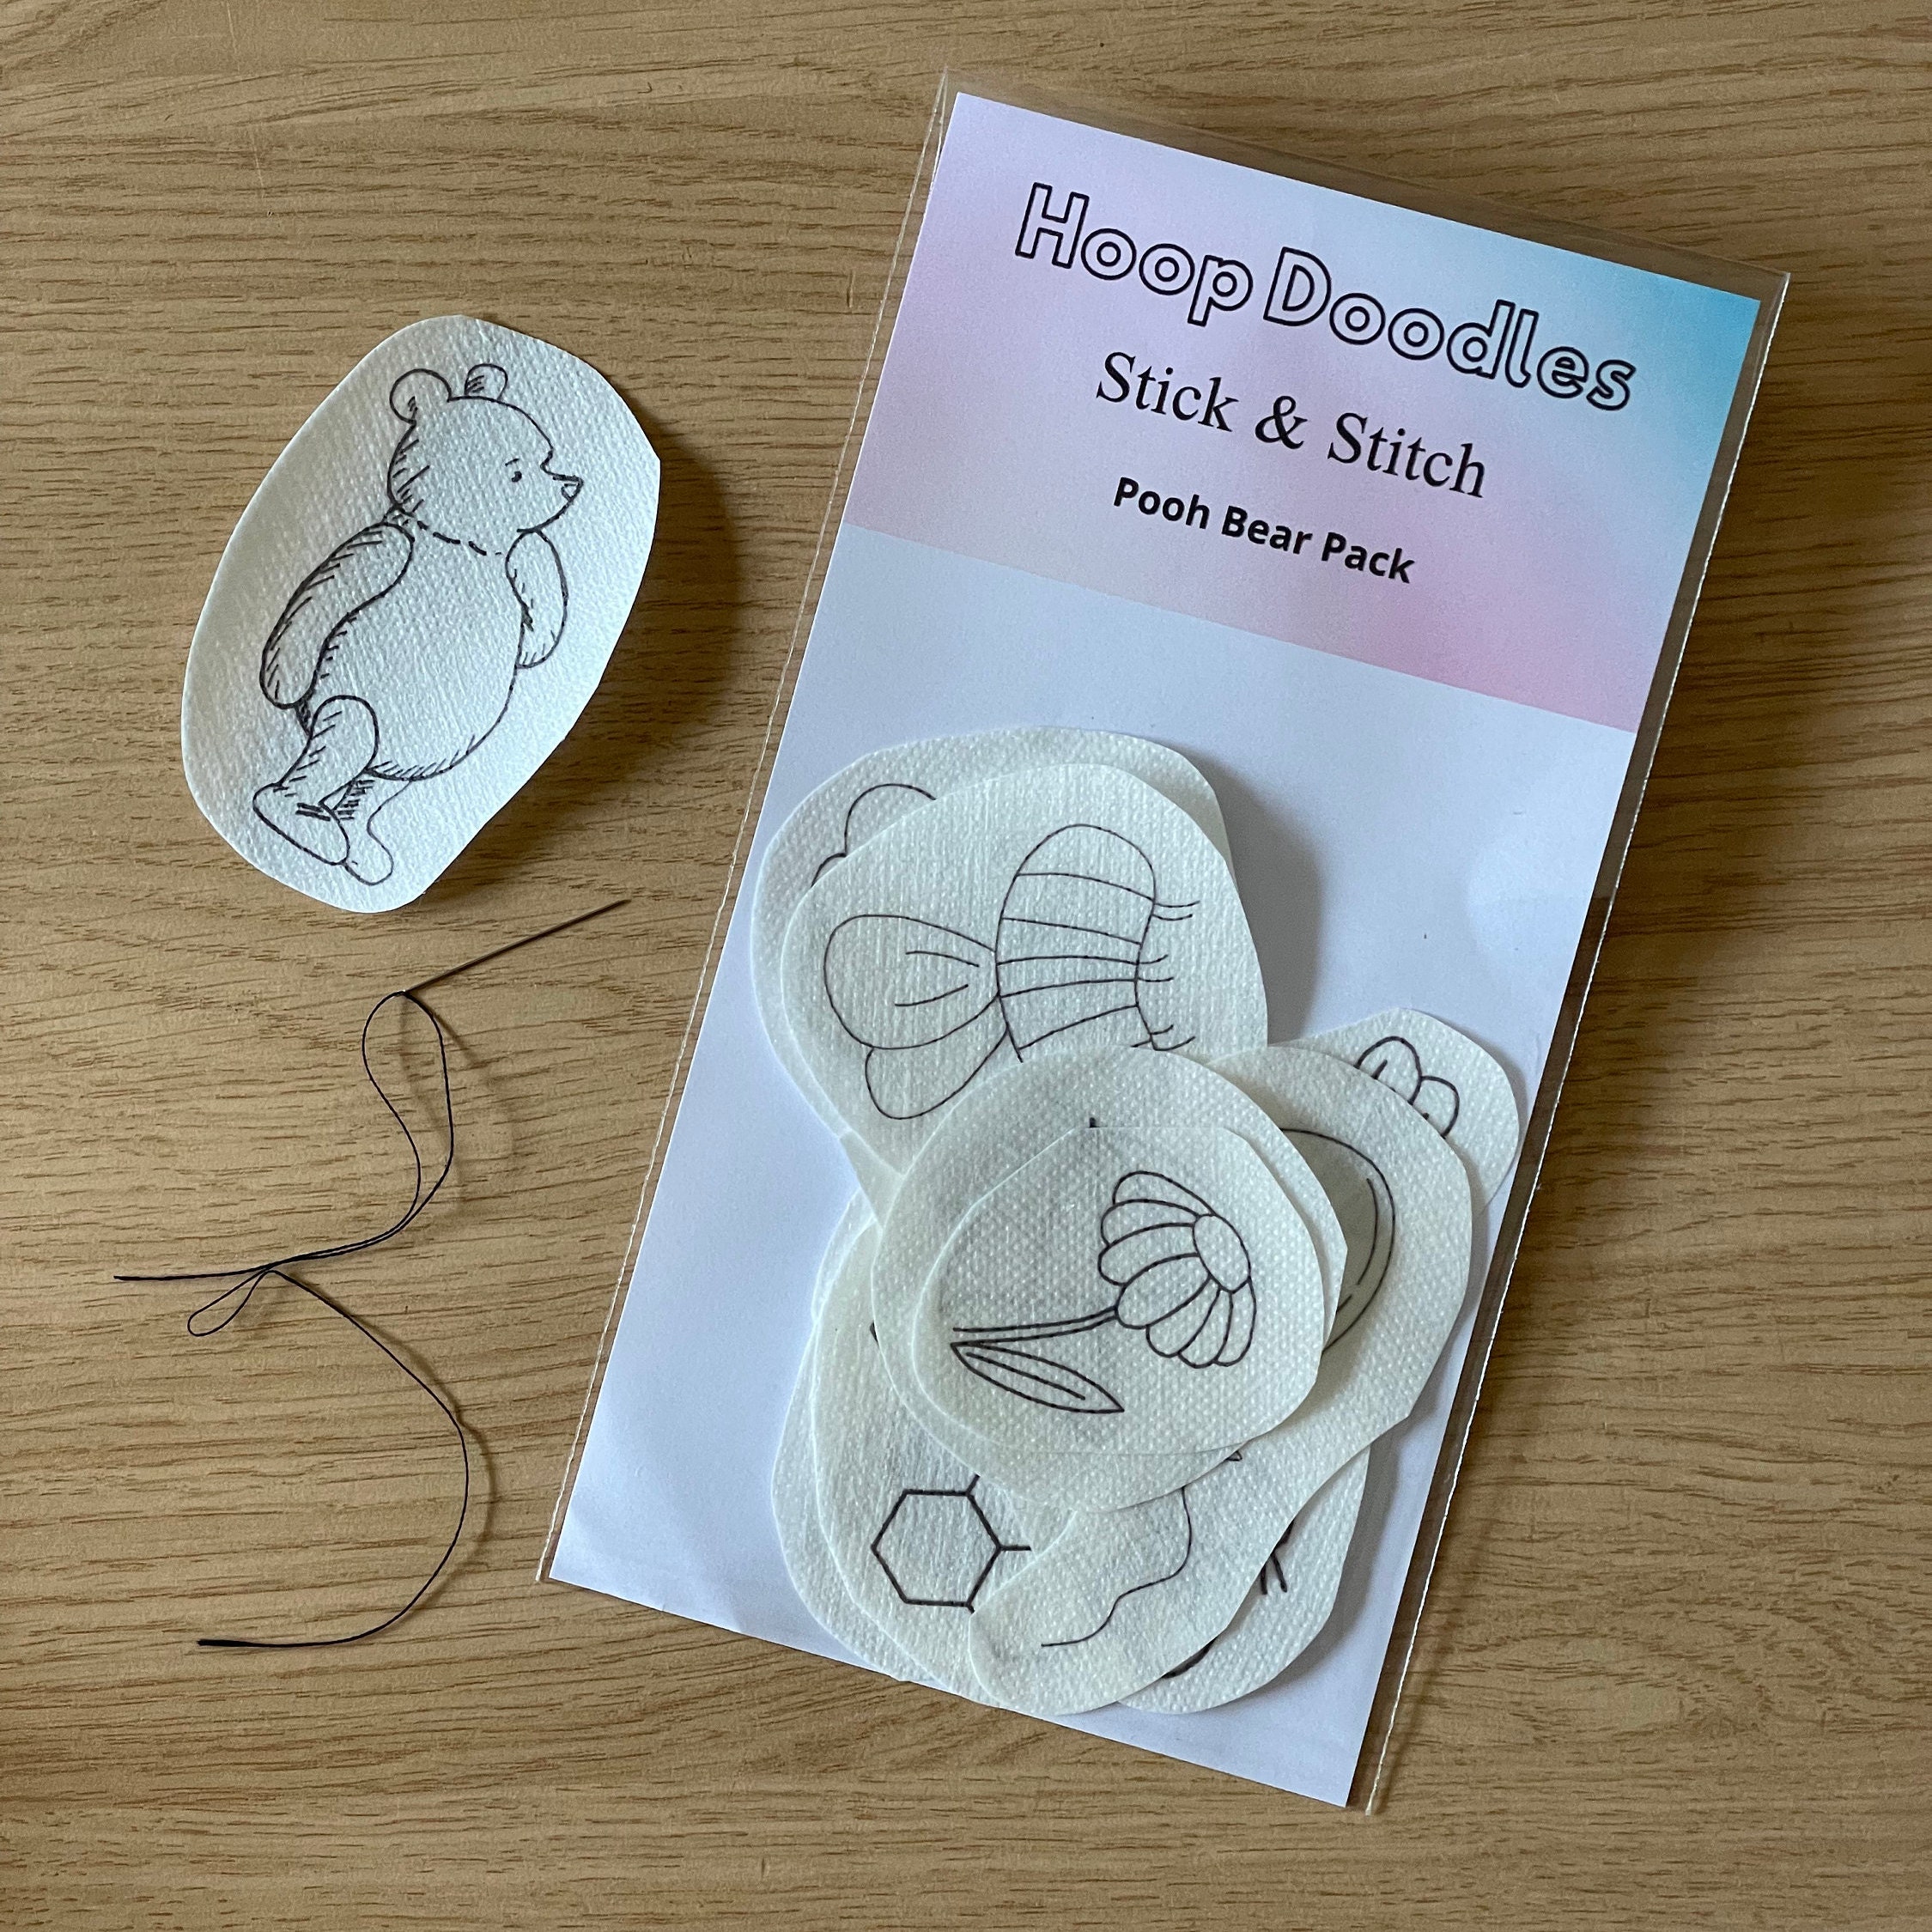 Stick and Stitch / Solo Pooh Bear Pack / Water Soluble Embroidery Stickers  / up Cycle / Customise Clothes / Patch / Hand Embroidery Tool -  Sweden